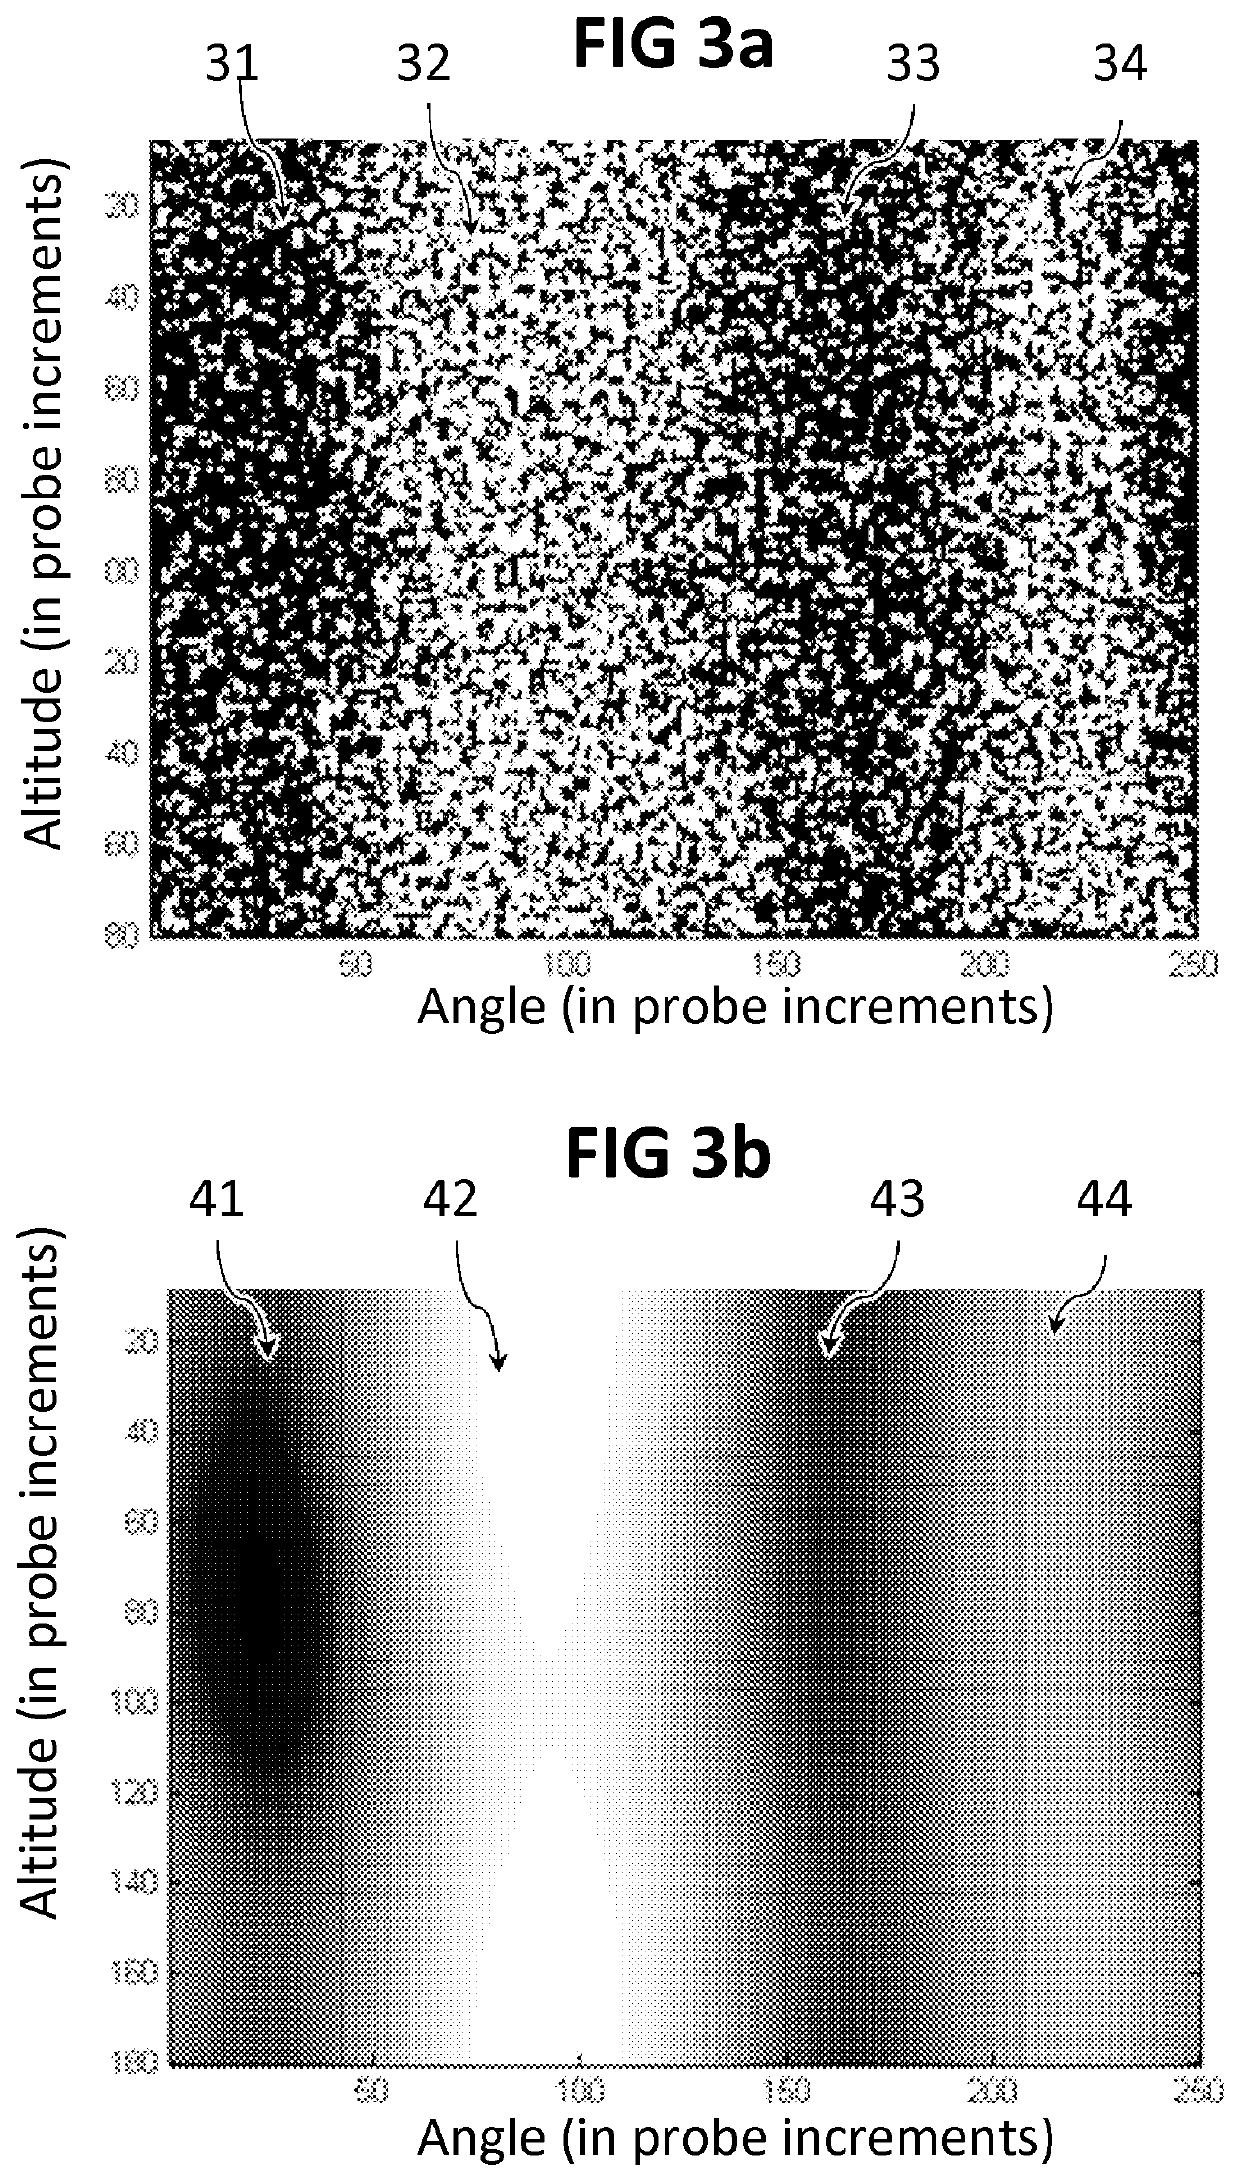 Method for detecting and characterizing defects in a heterogenous material via ultrasound